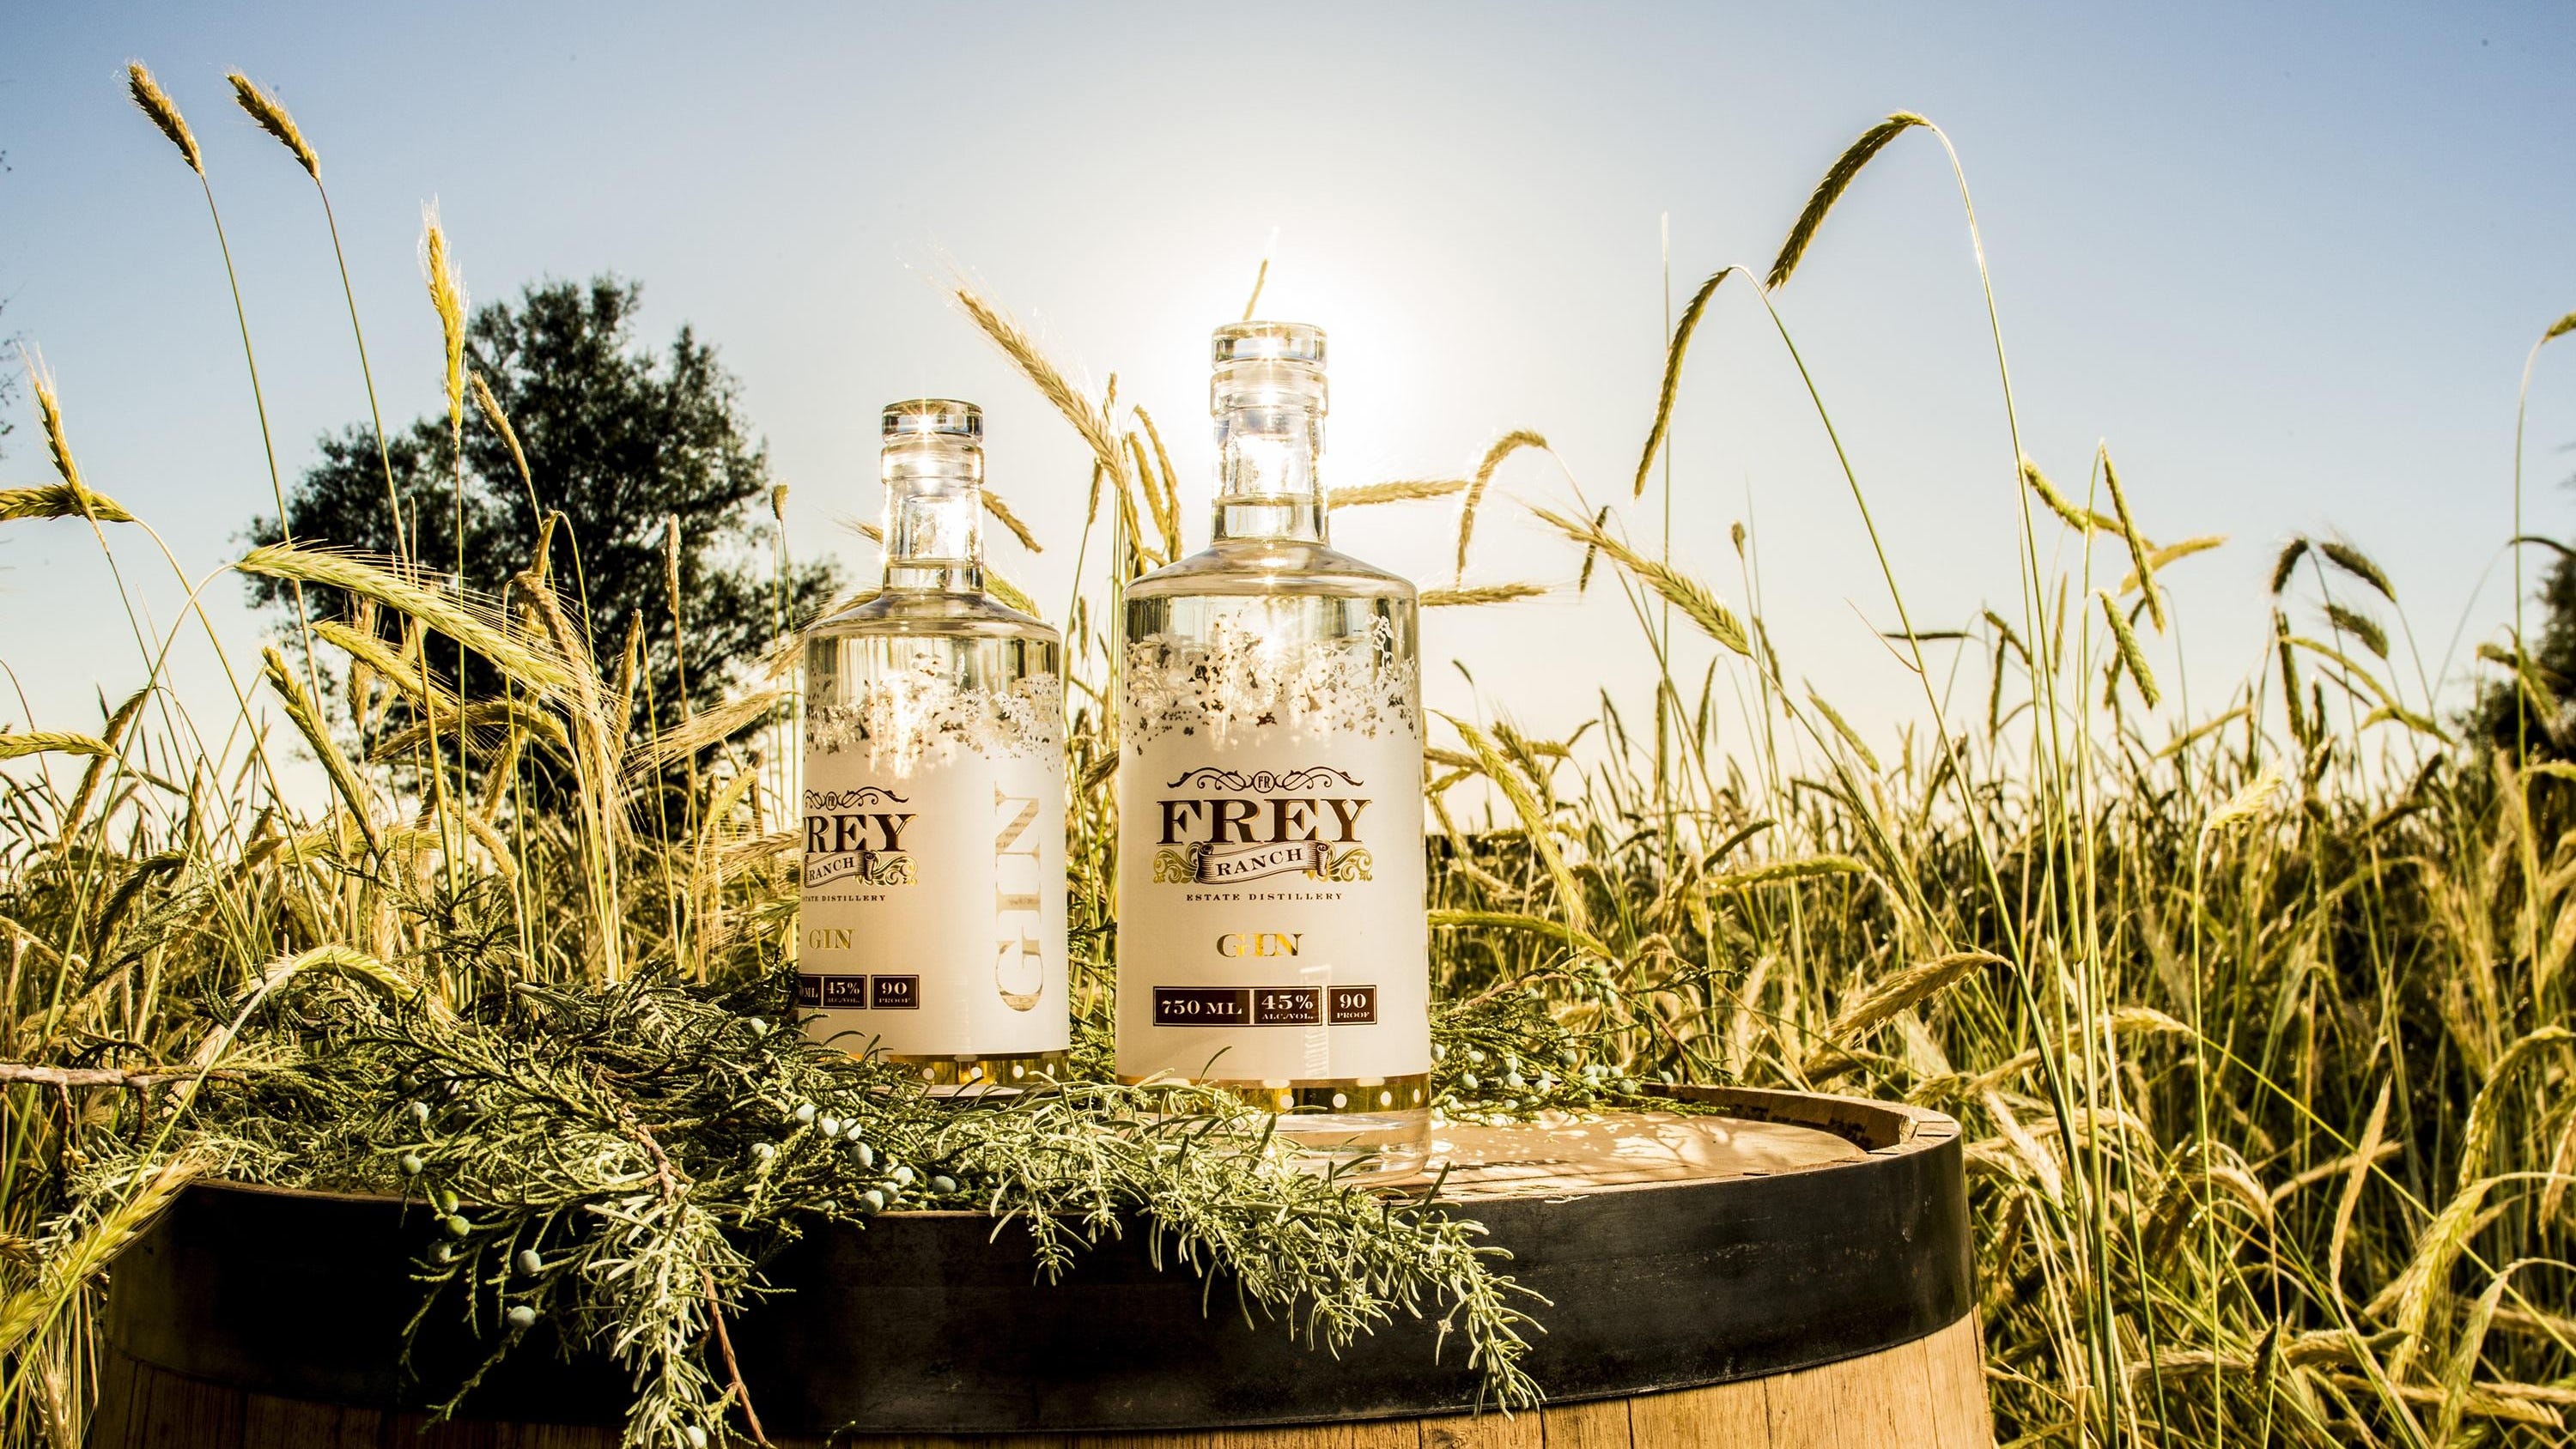 A modern approach to farming and distilling at Frey Ranch | NCET - Reno Gazette-Journal